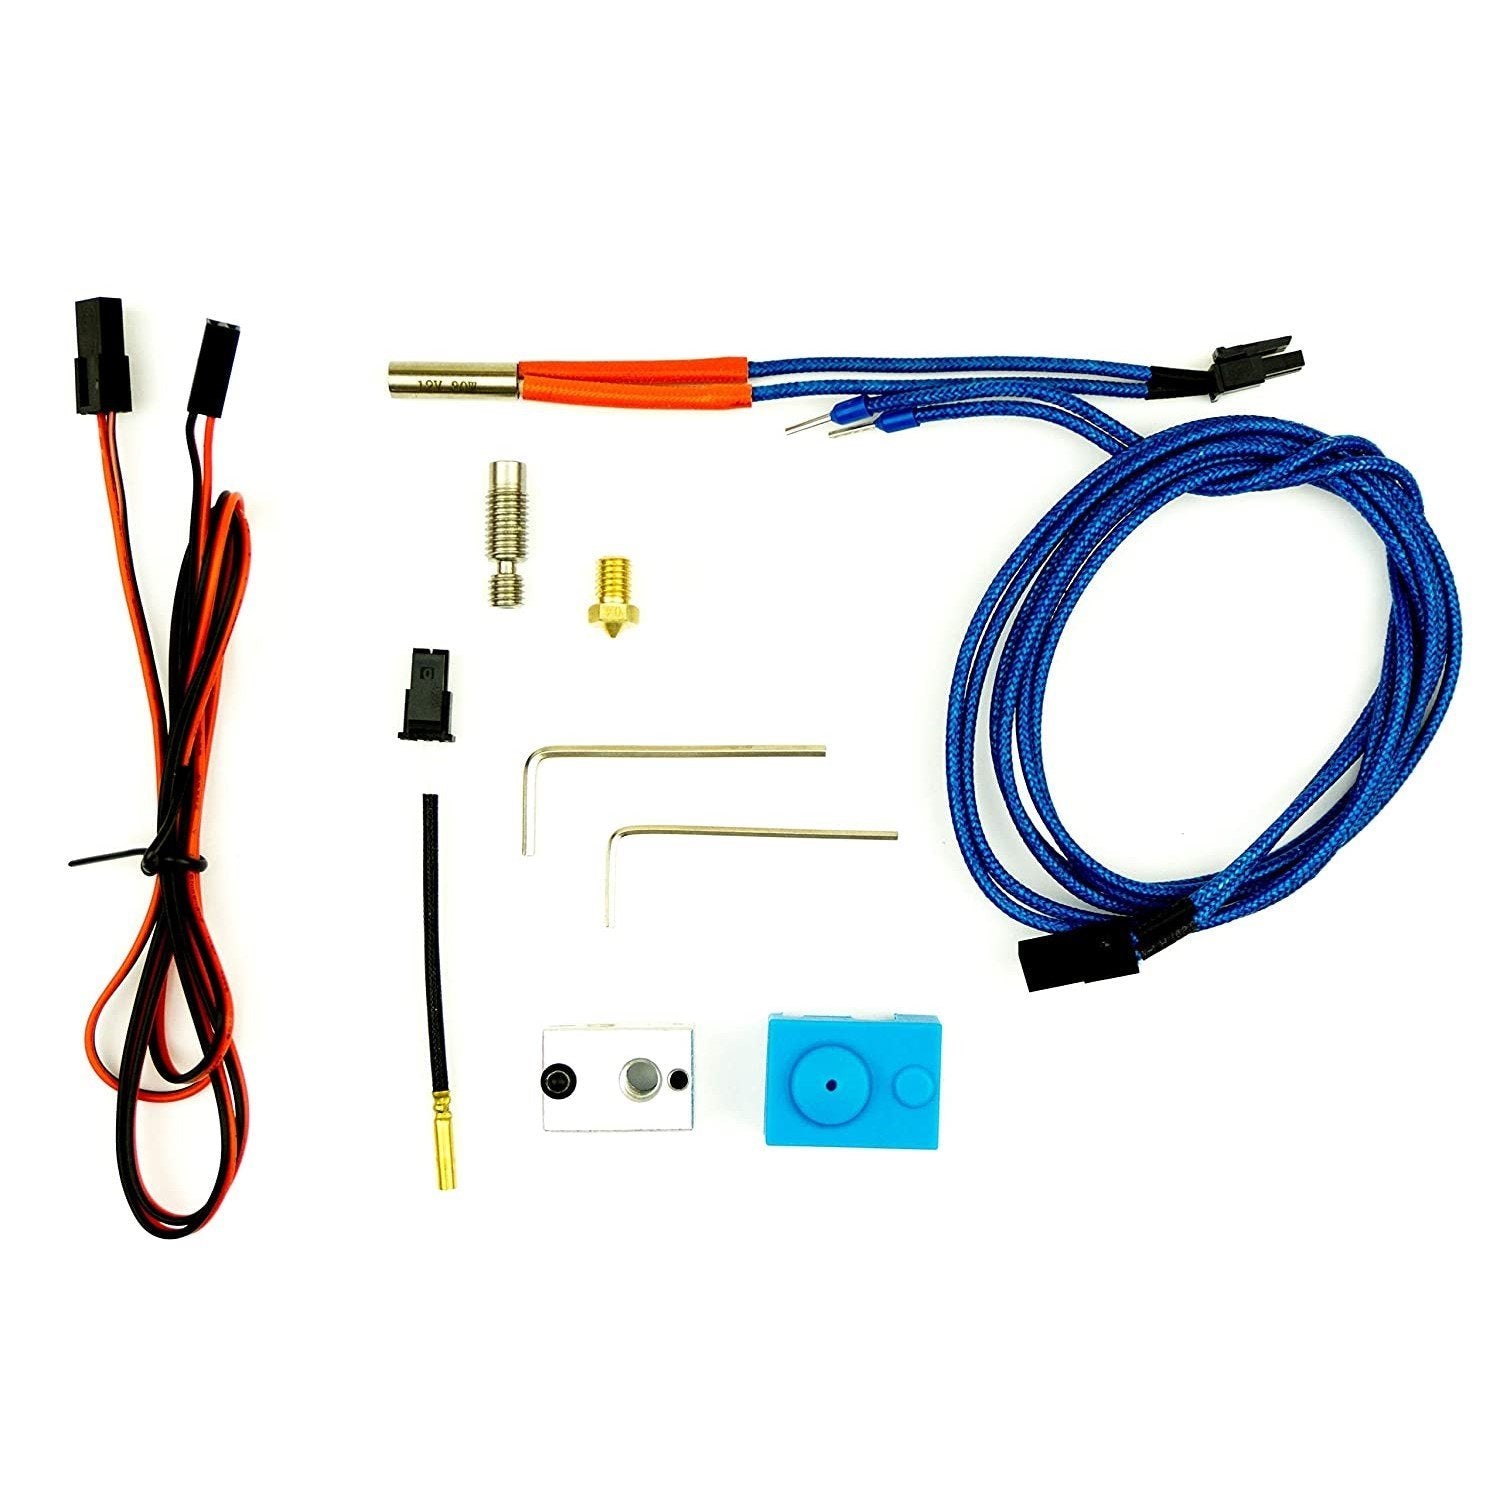 Repair / Upgrade Kit for Prusa i3 and 1.75mm V6 Compatible All Metal Hot Ends 12V